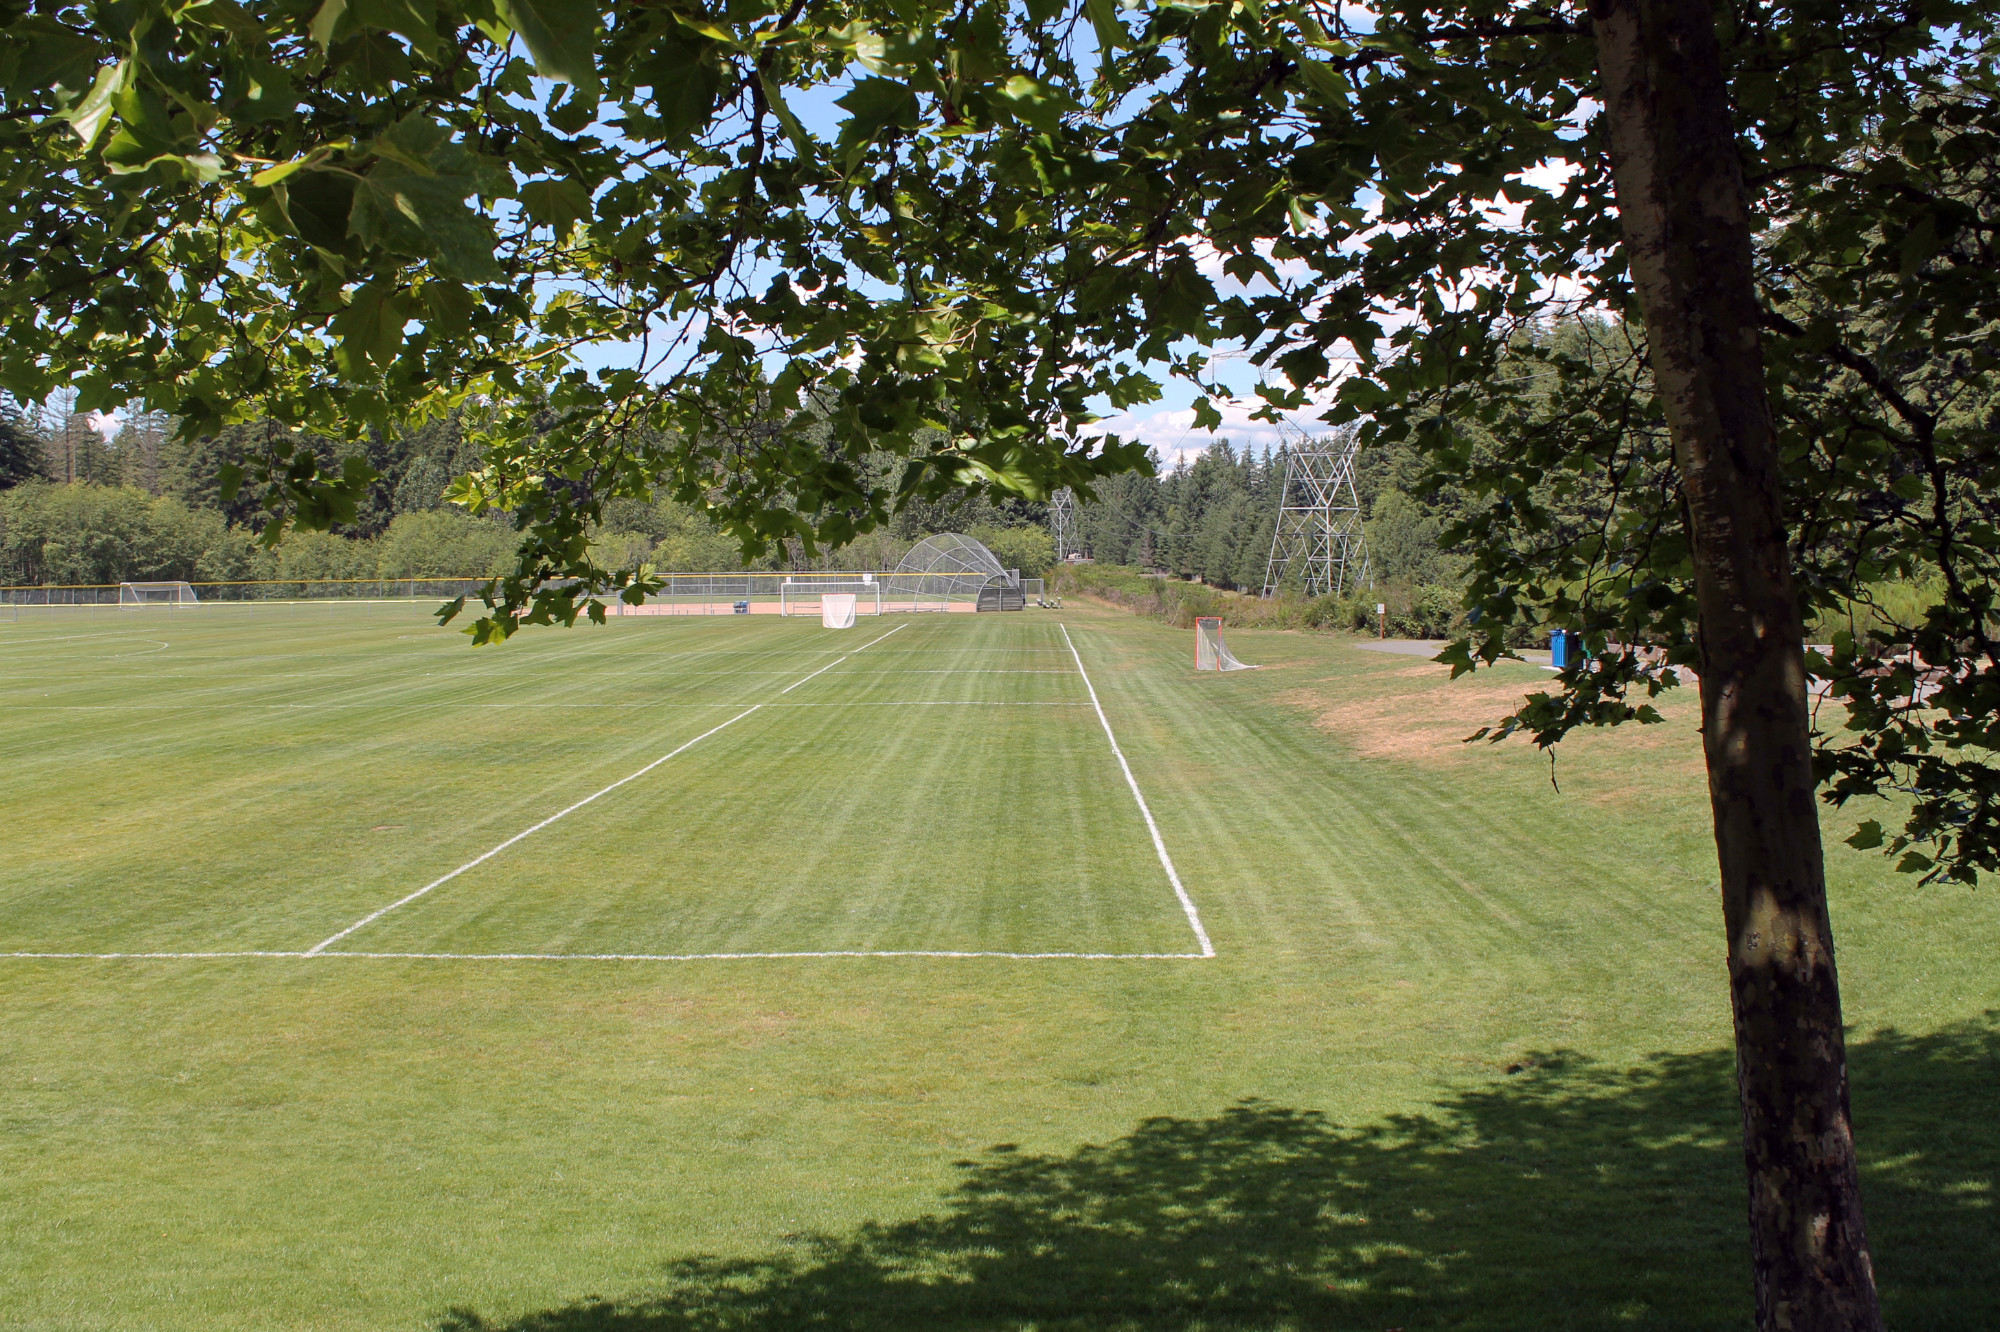 Klahanie Park soccer field with baseball diamond in the background. The photo is taken from the shade of a deciduous tree, its branches overhanging the top of the photo.